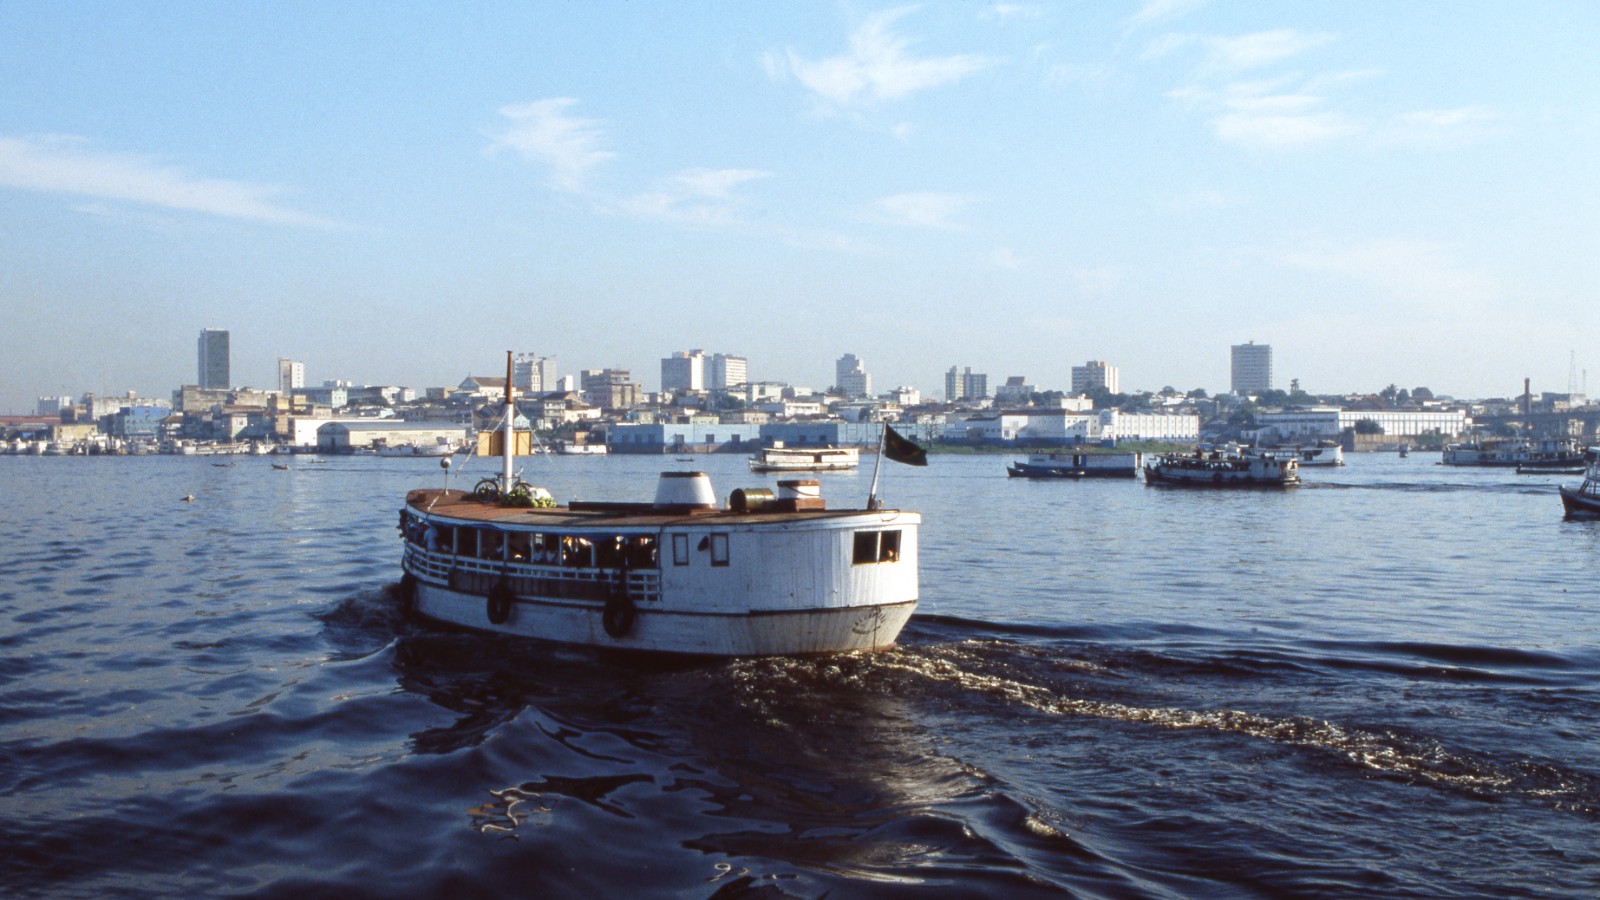 In this image you see a white ferry full of tourists as it travels down the Amazon River.  In the background you can see the skyline of the city of Manaus, Brazil.